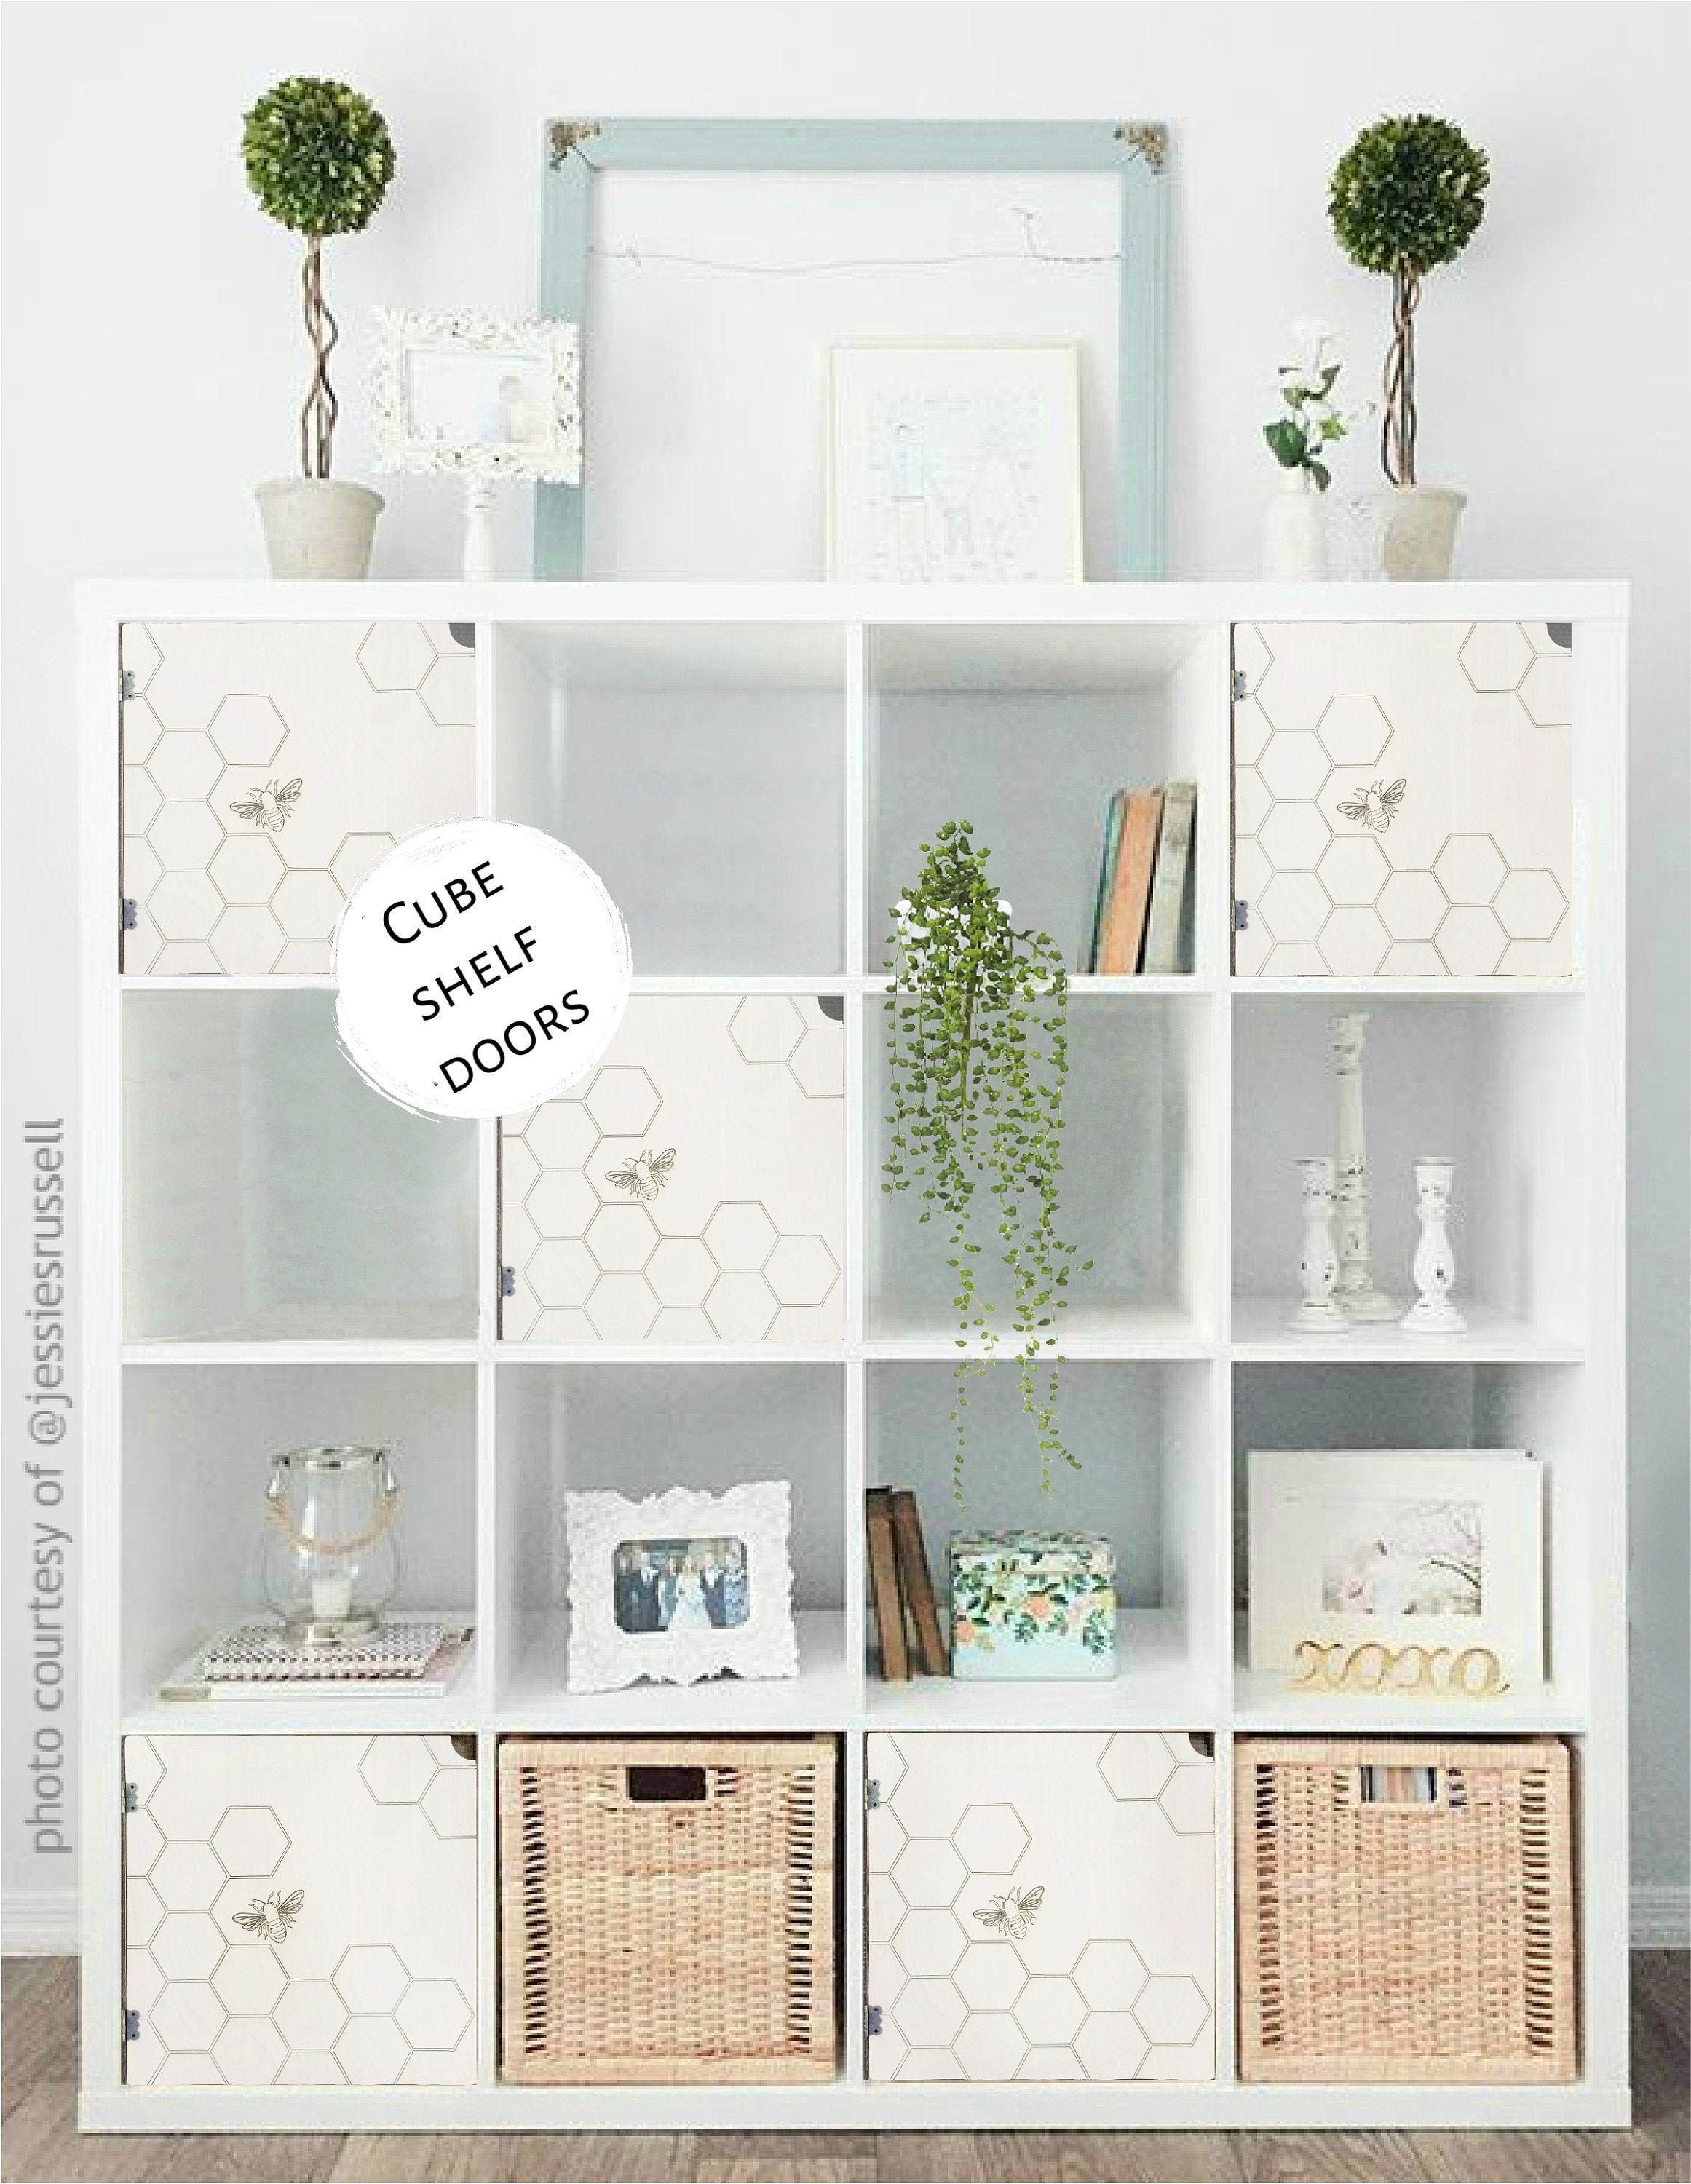 Easy No Tools Door For Cube Shelves Bee, Making Your Own Honeycomb Shelves Ikea